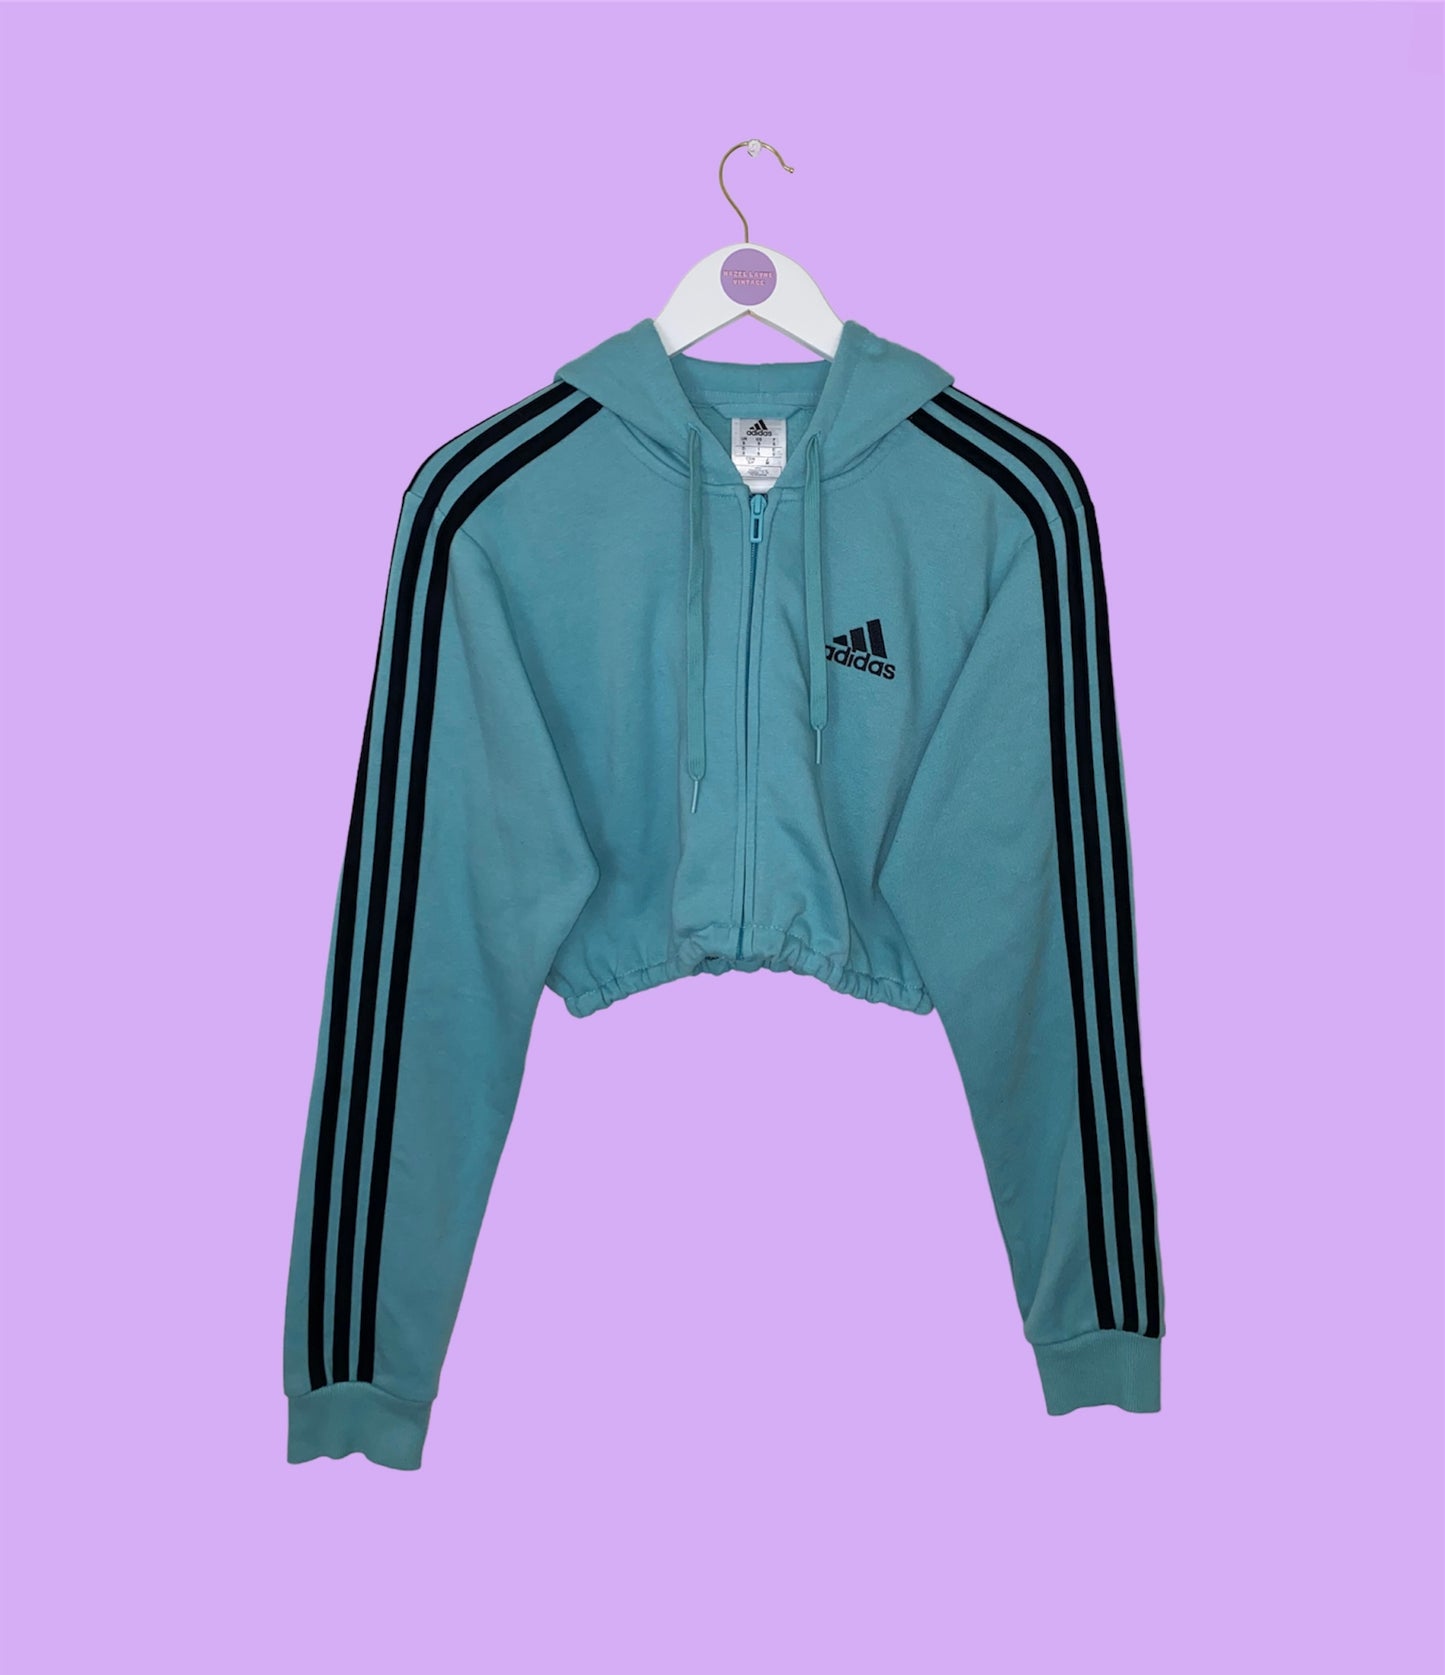 blue zip up crop hoodie with black adidas logo shown on a lilac background